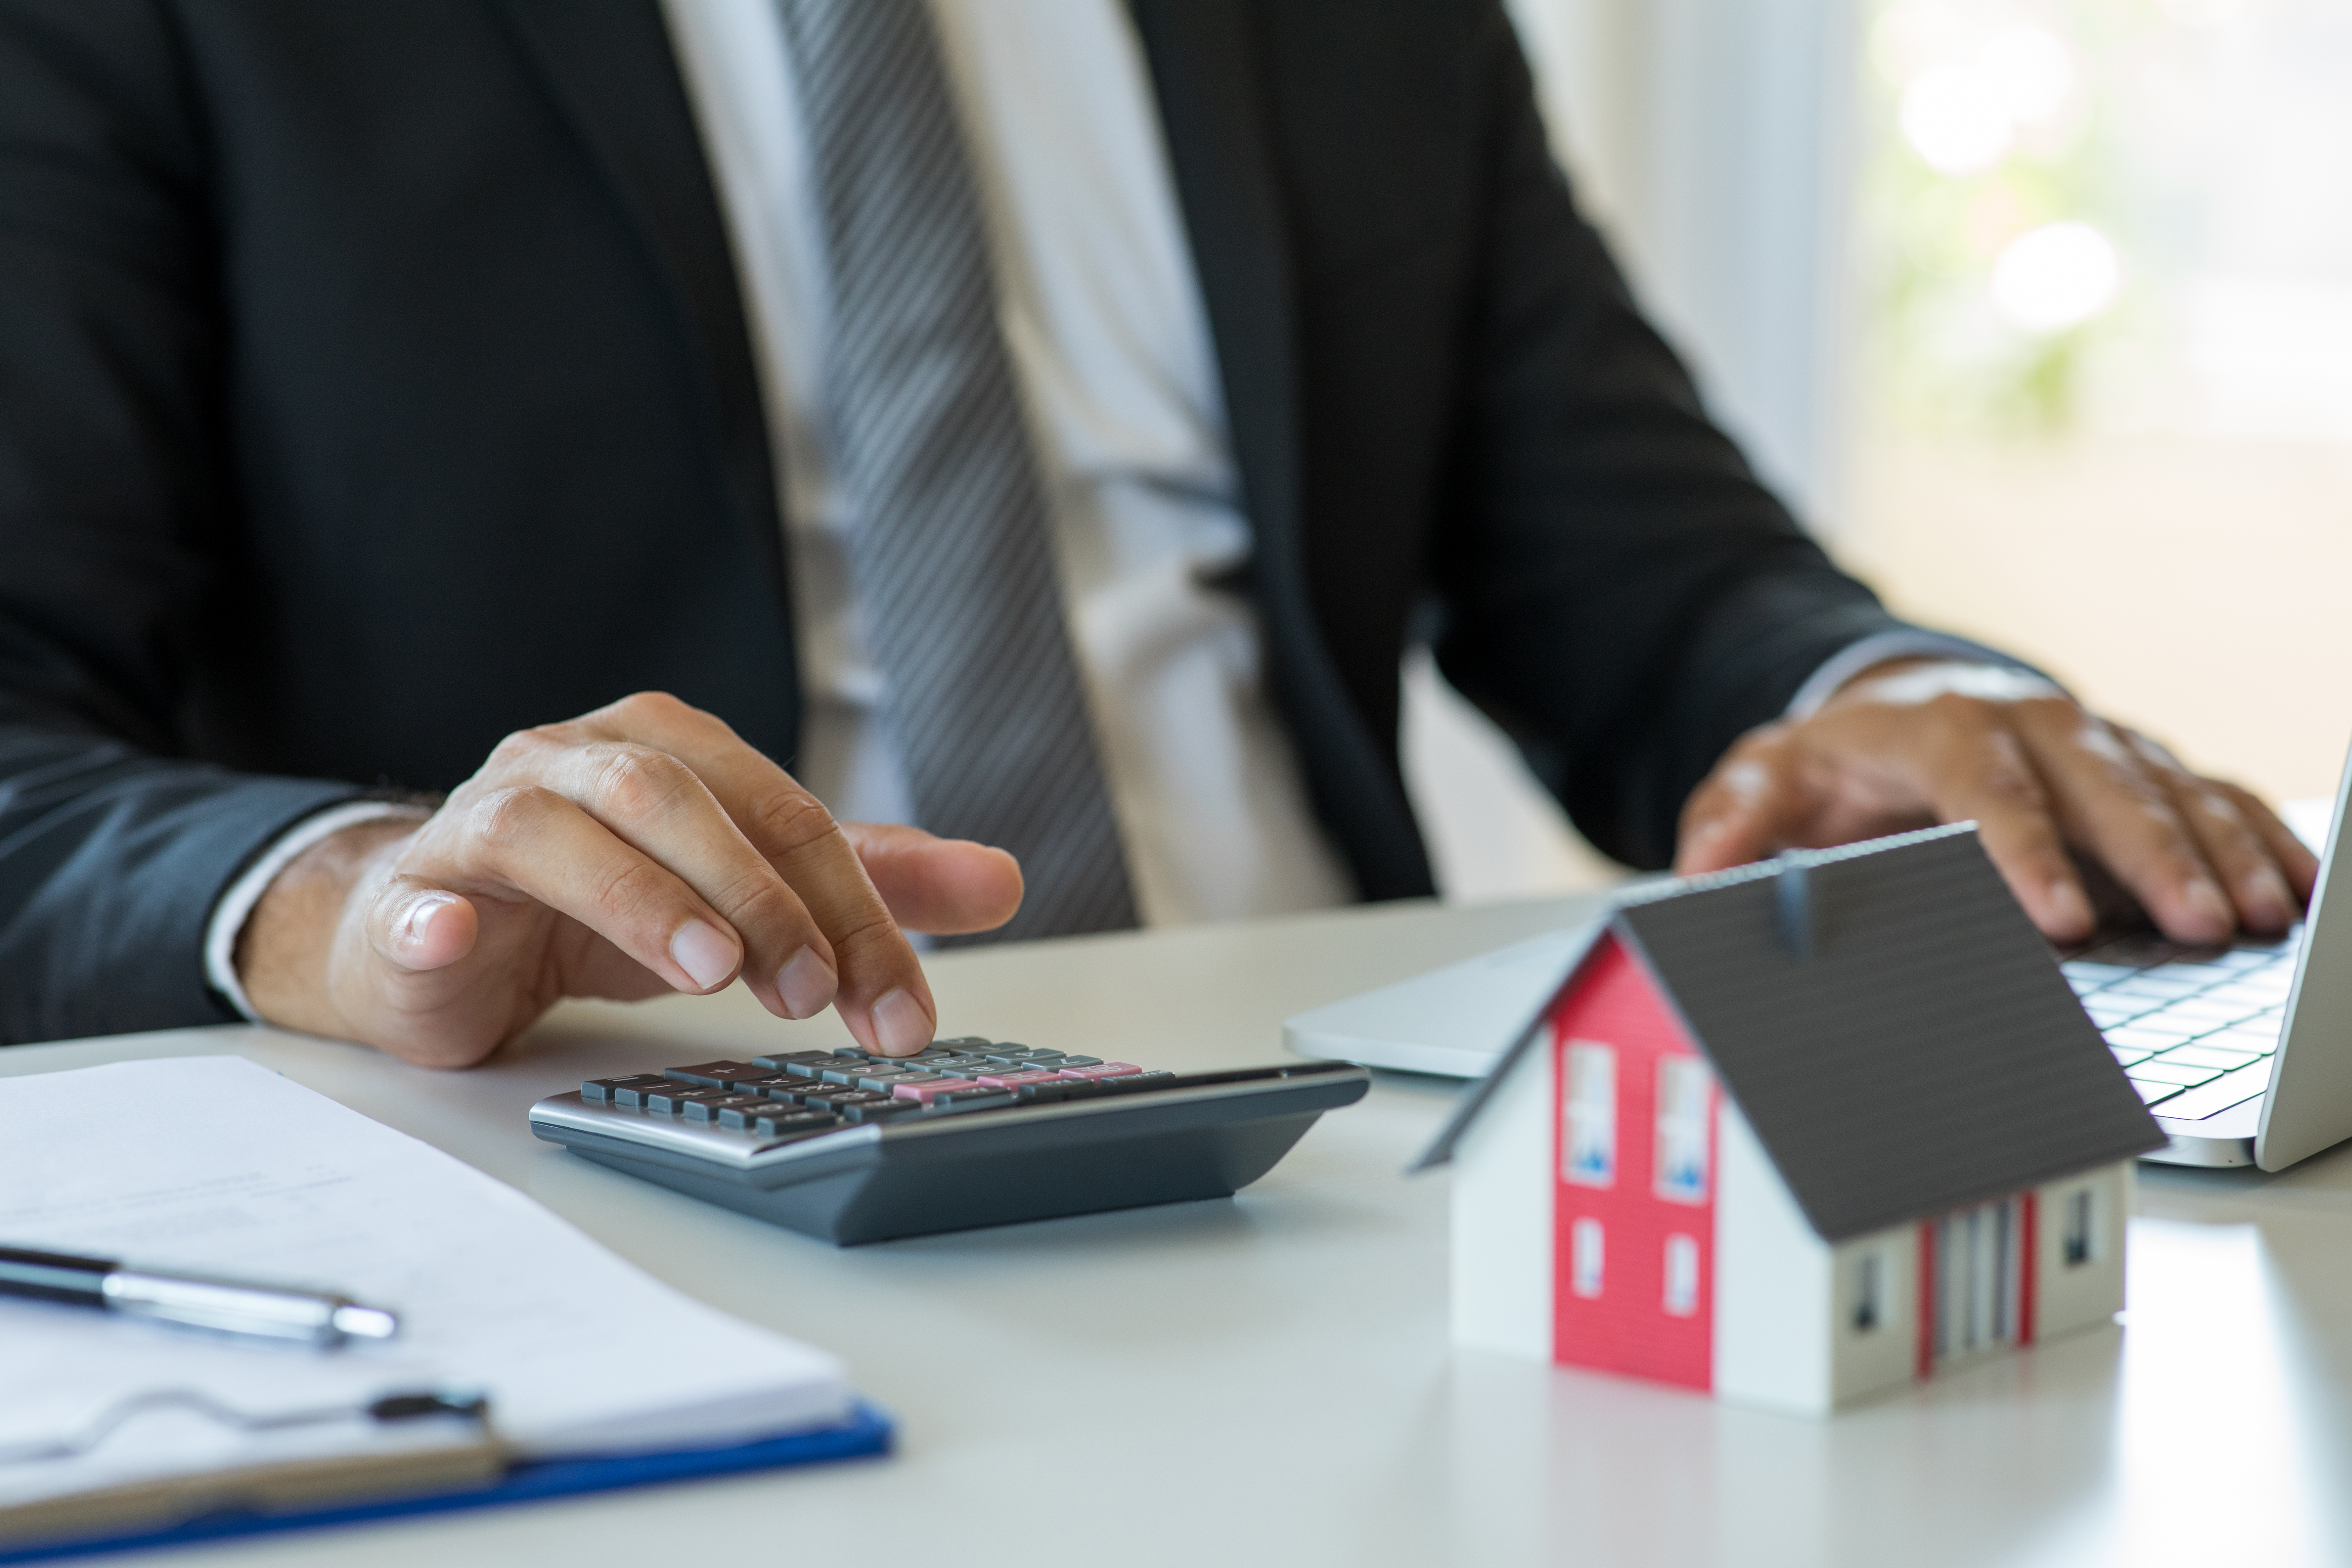 How to choose the right mortgage hedge advisor